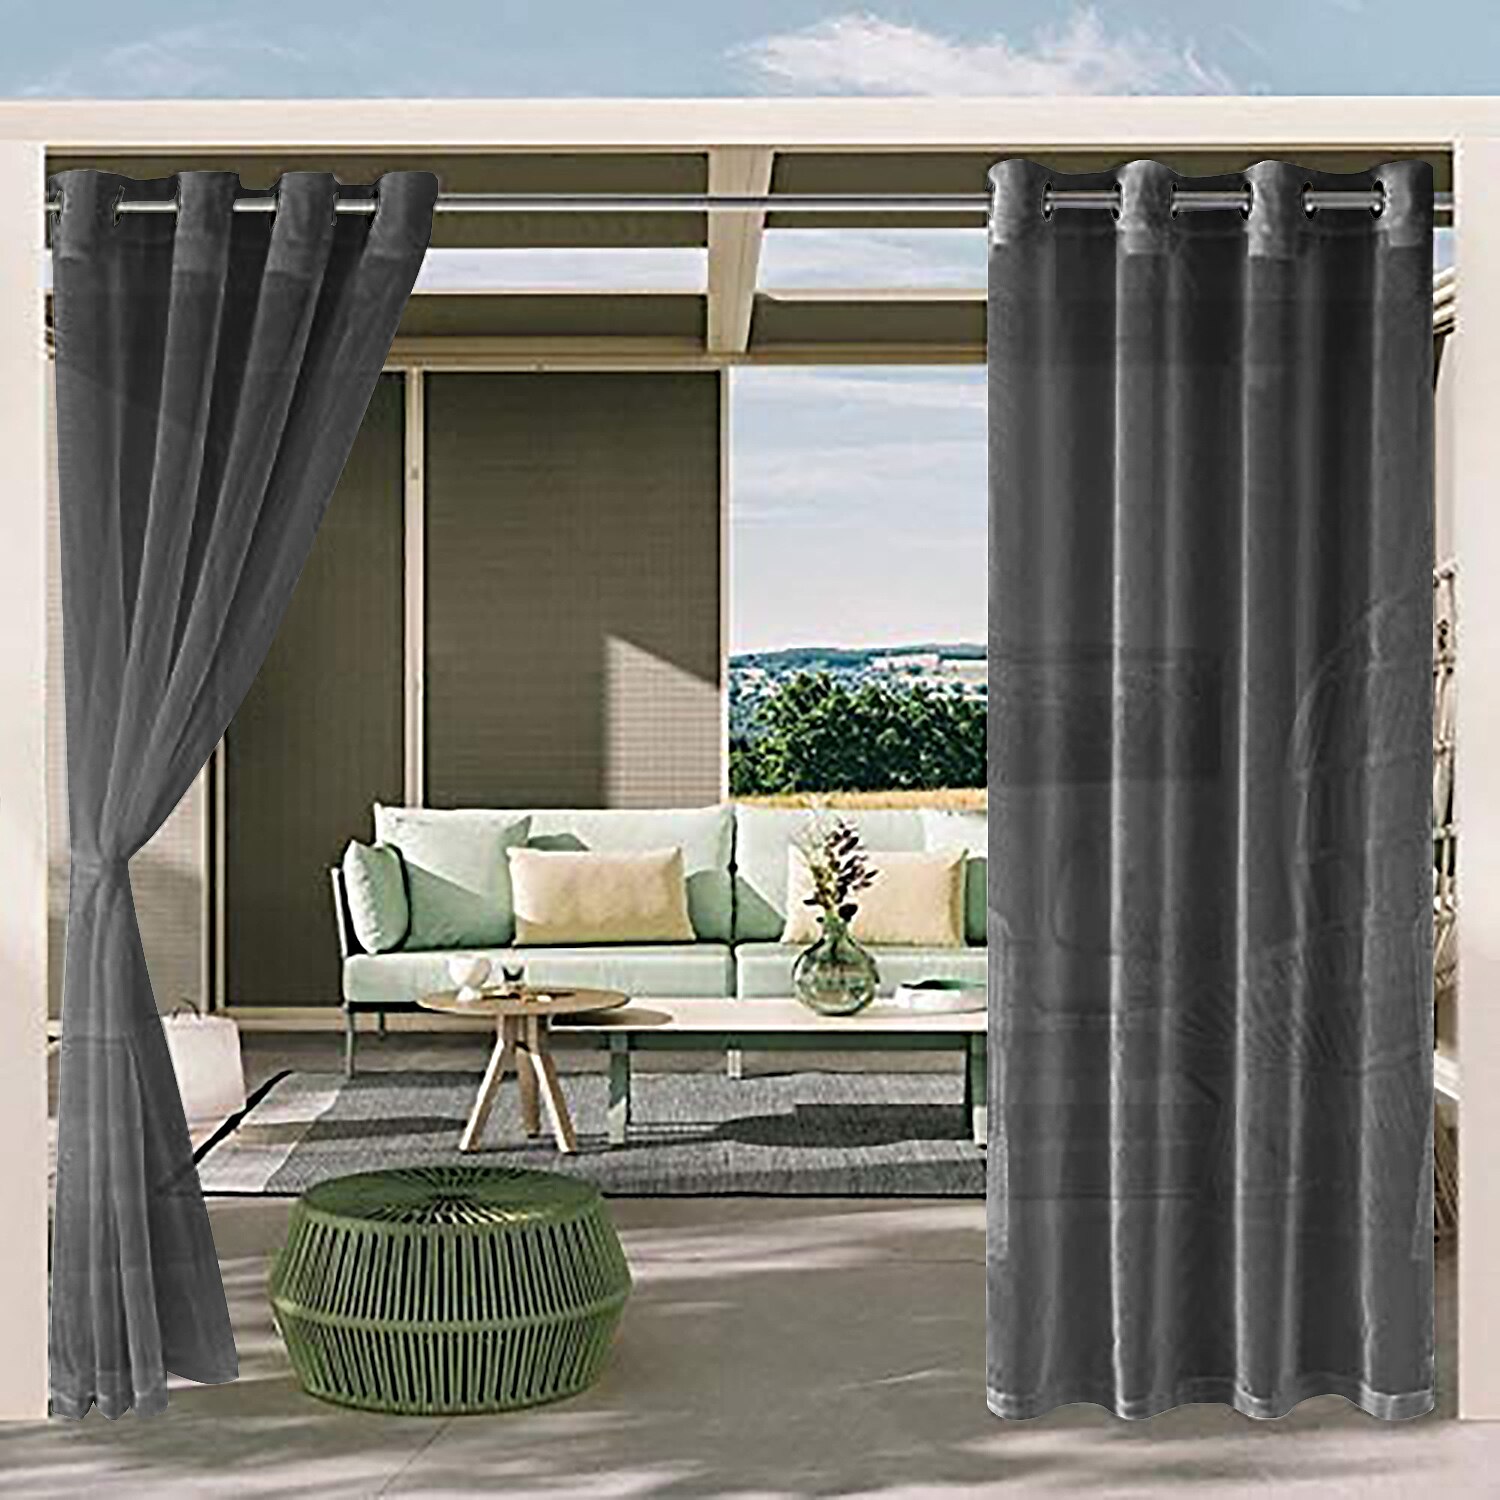 Waterproof Outdoor Curtain Privacy, Sliding Patio Beach Curtain Drapes